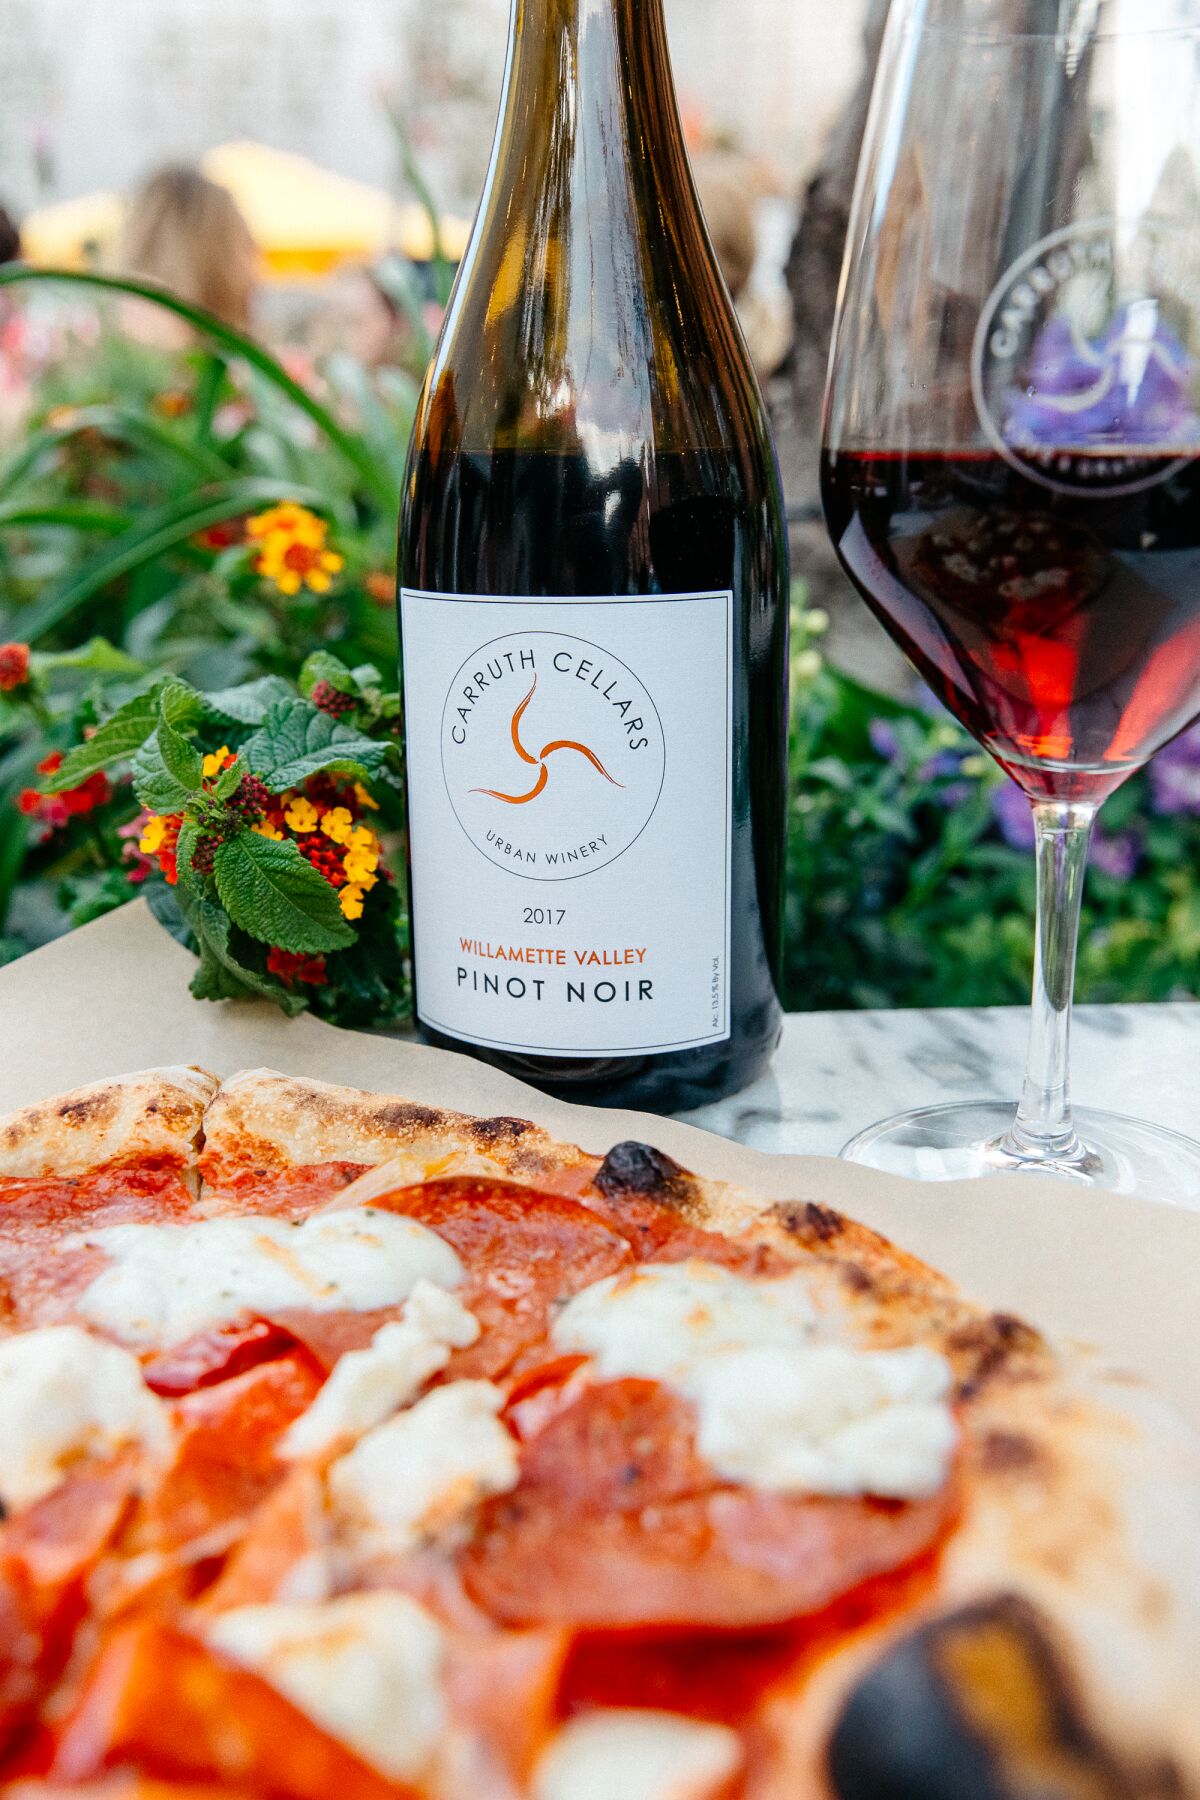 Wine served with wood fired pizza.